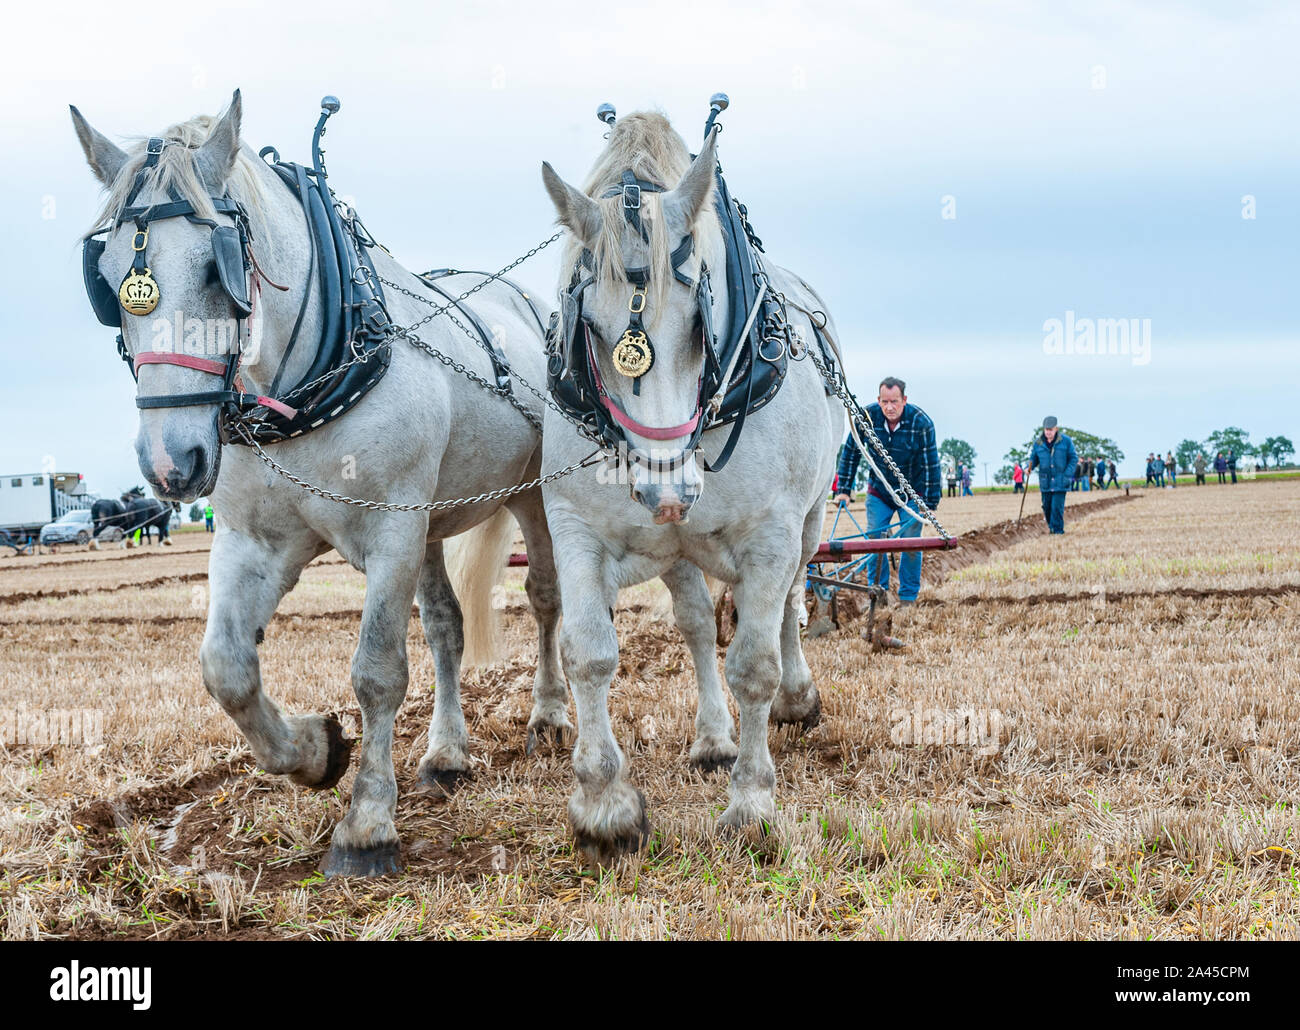 Nocton, Lincoln, Lincolnshire, UK. 12th October 2019.    Over 200 champion ploughmen and women from all over the country have assembled near Lincoln to compete in the 2019 British National Ploughing Championships.  The competition includes many types of plough and styles of ploughing across the 250-acre site; including heavy horses, vintage tractors and steam ploughing engines.  The championships, now in there 69th year, are organised by The Society of Ploughmen with the objective of promoting and encourage the art, skill and science of ploughing the land. Credit: Matt Limb OBE/Alamy Live News Stock Photo